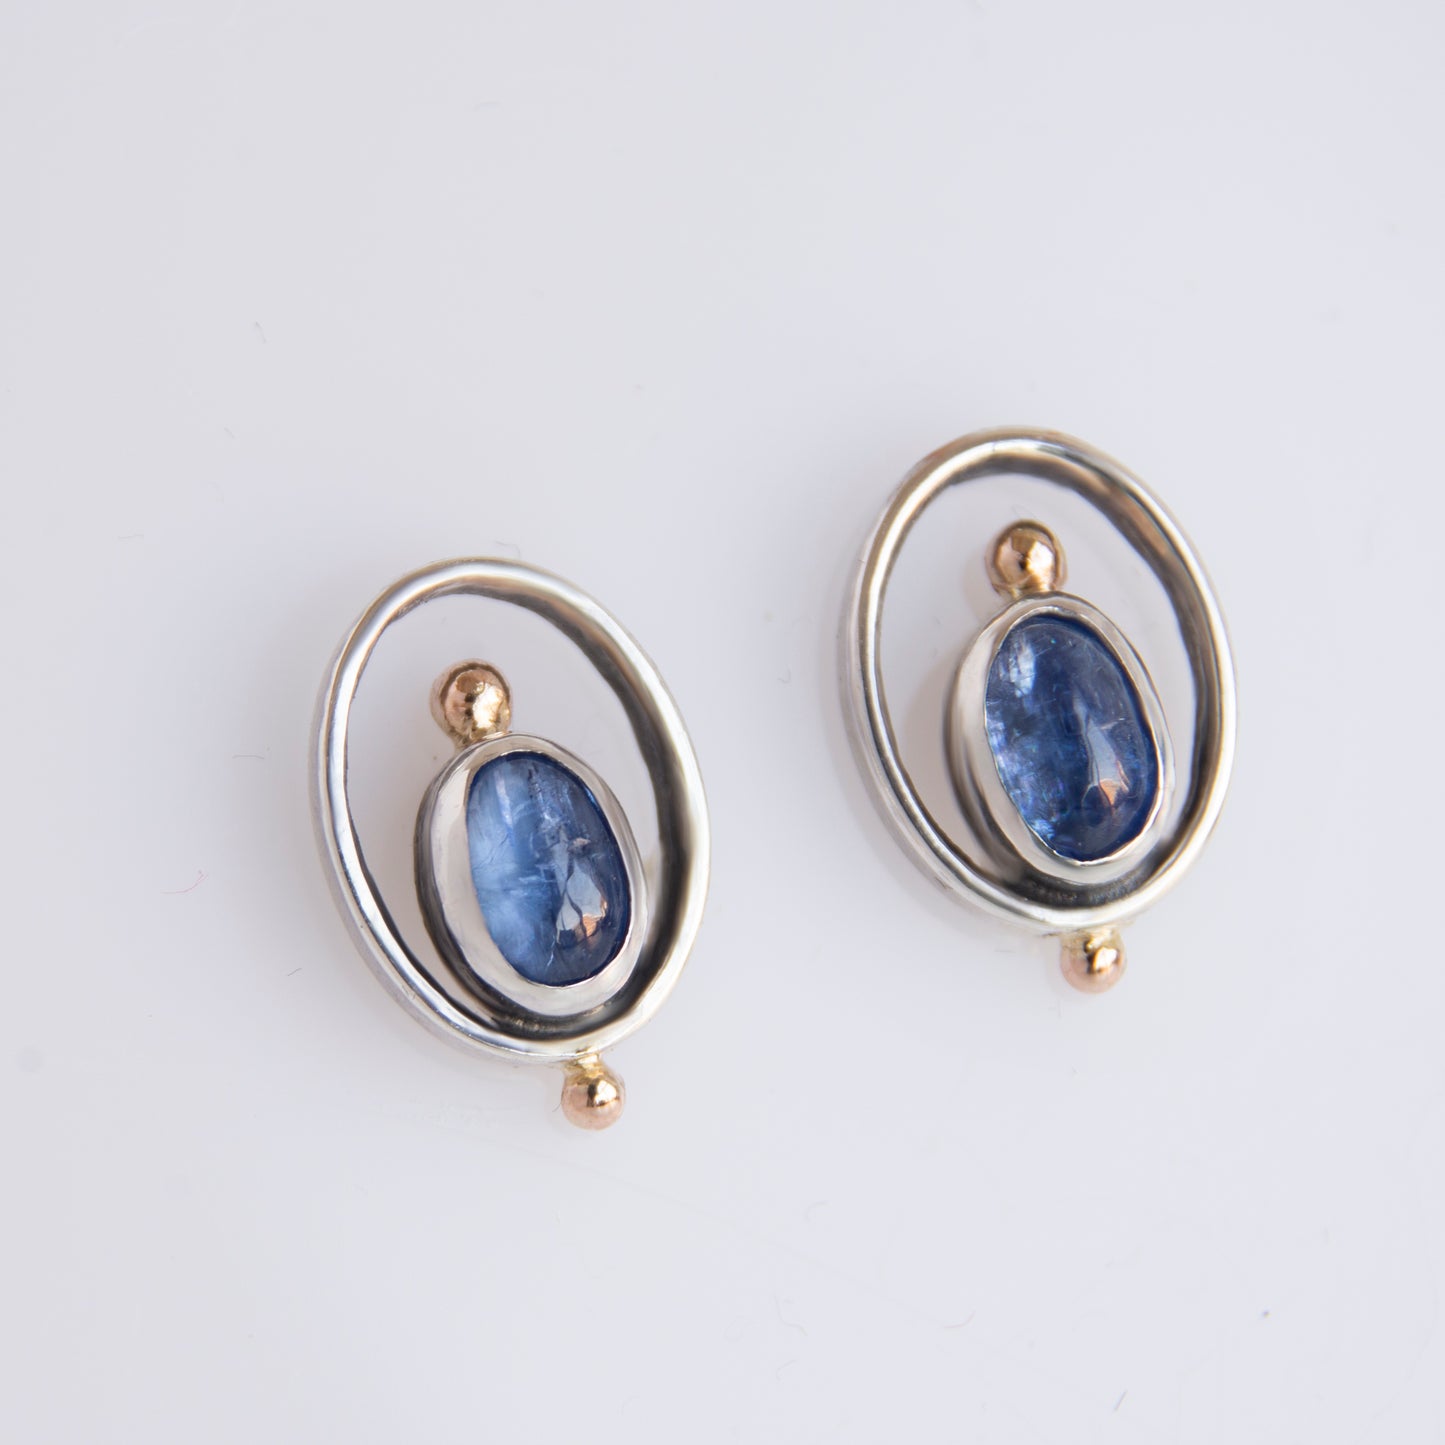 Kyanite Stone, Minimalistic Earrings With 14k Gold Beads ,,frame''